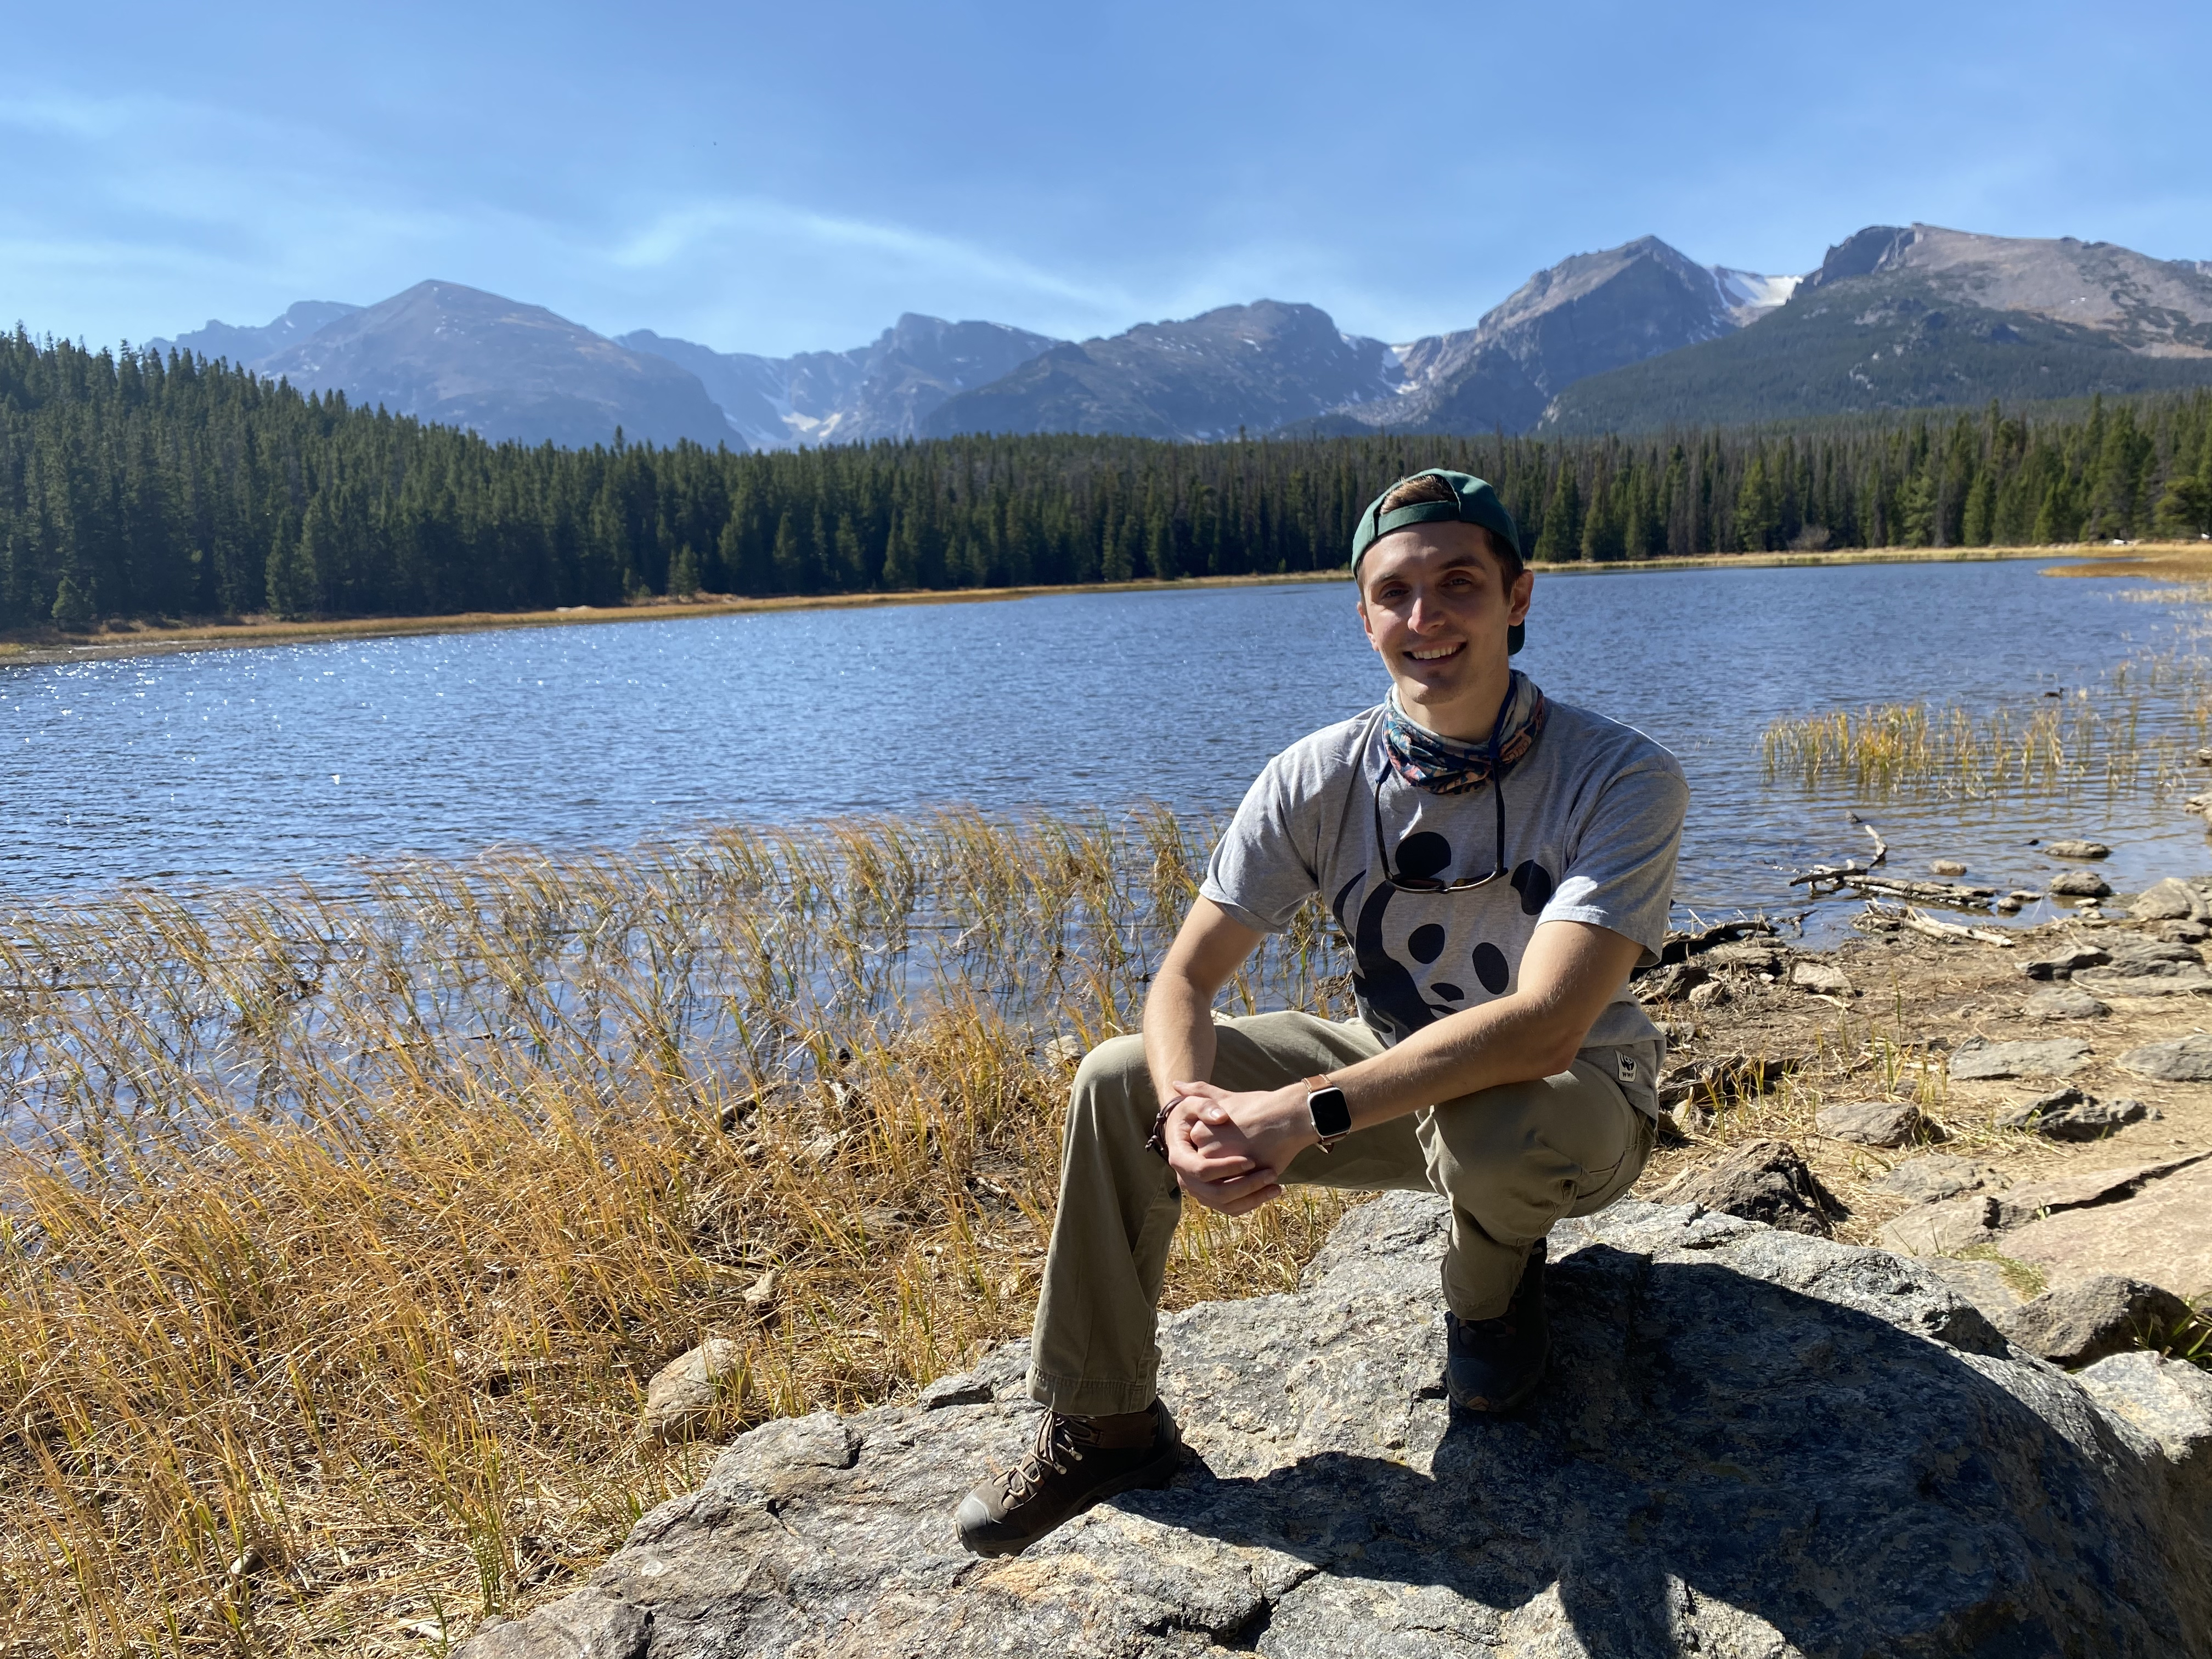 Zachary Dvornicky-Raymond shown sitting by a lake with mountains in the background